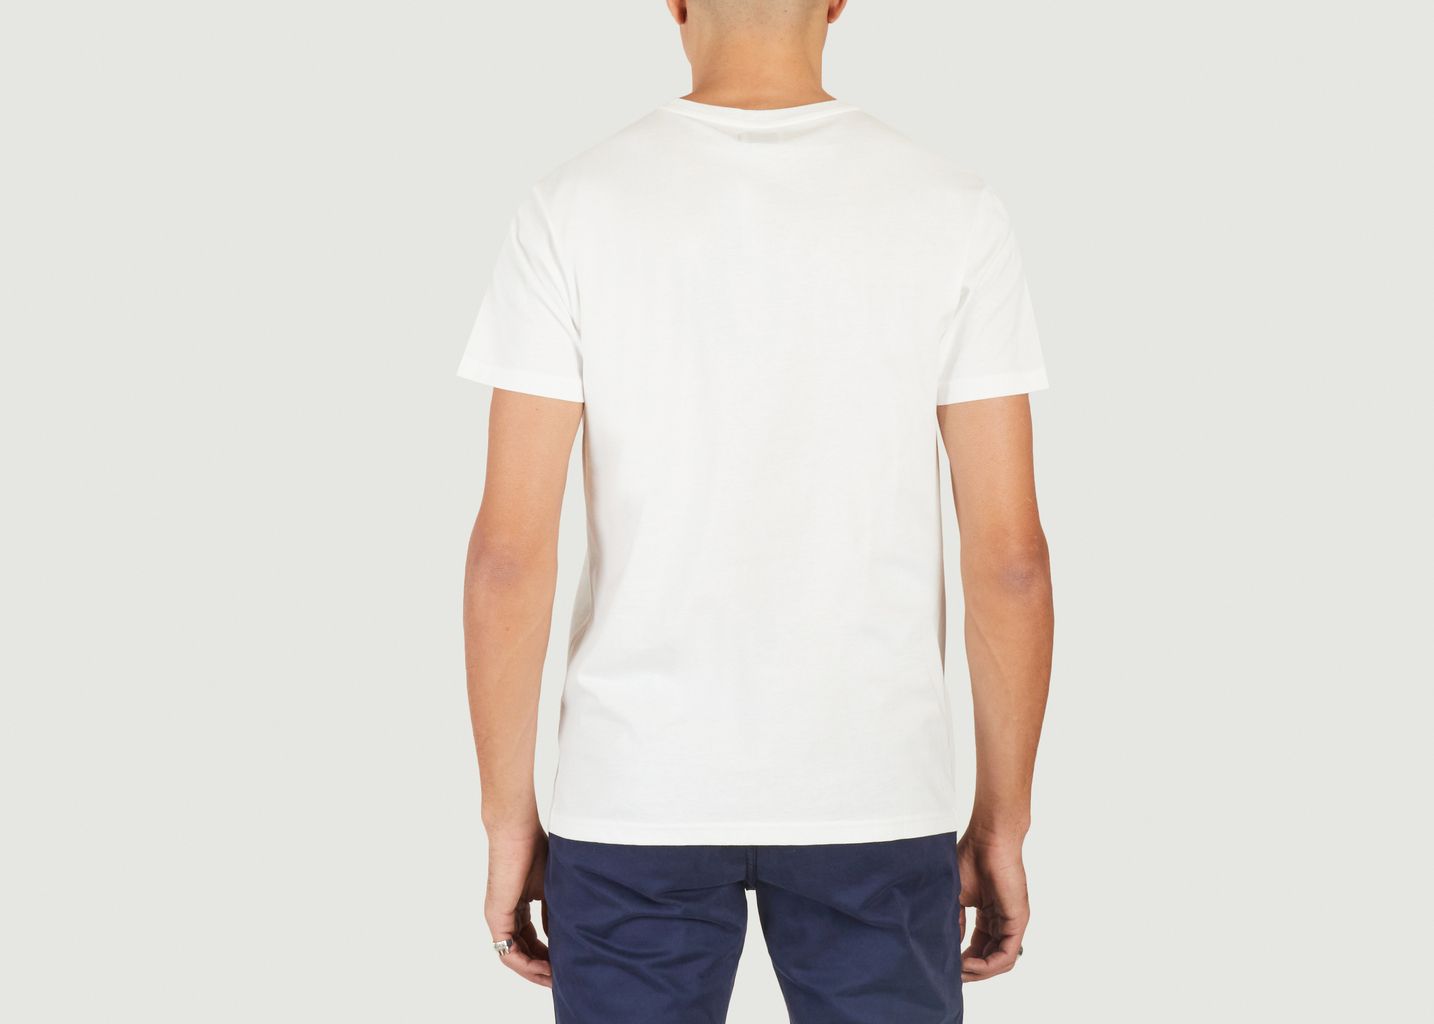 Tides printed T-shirt - Bask in the Sun